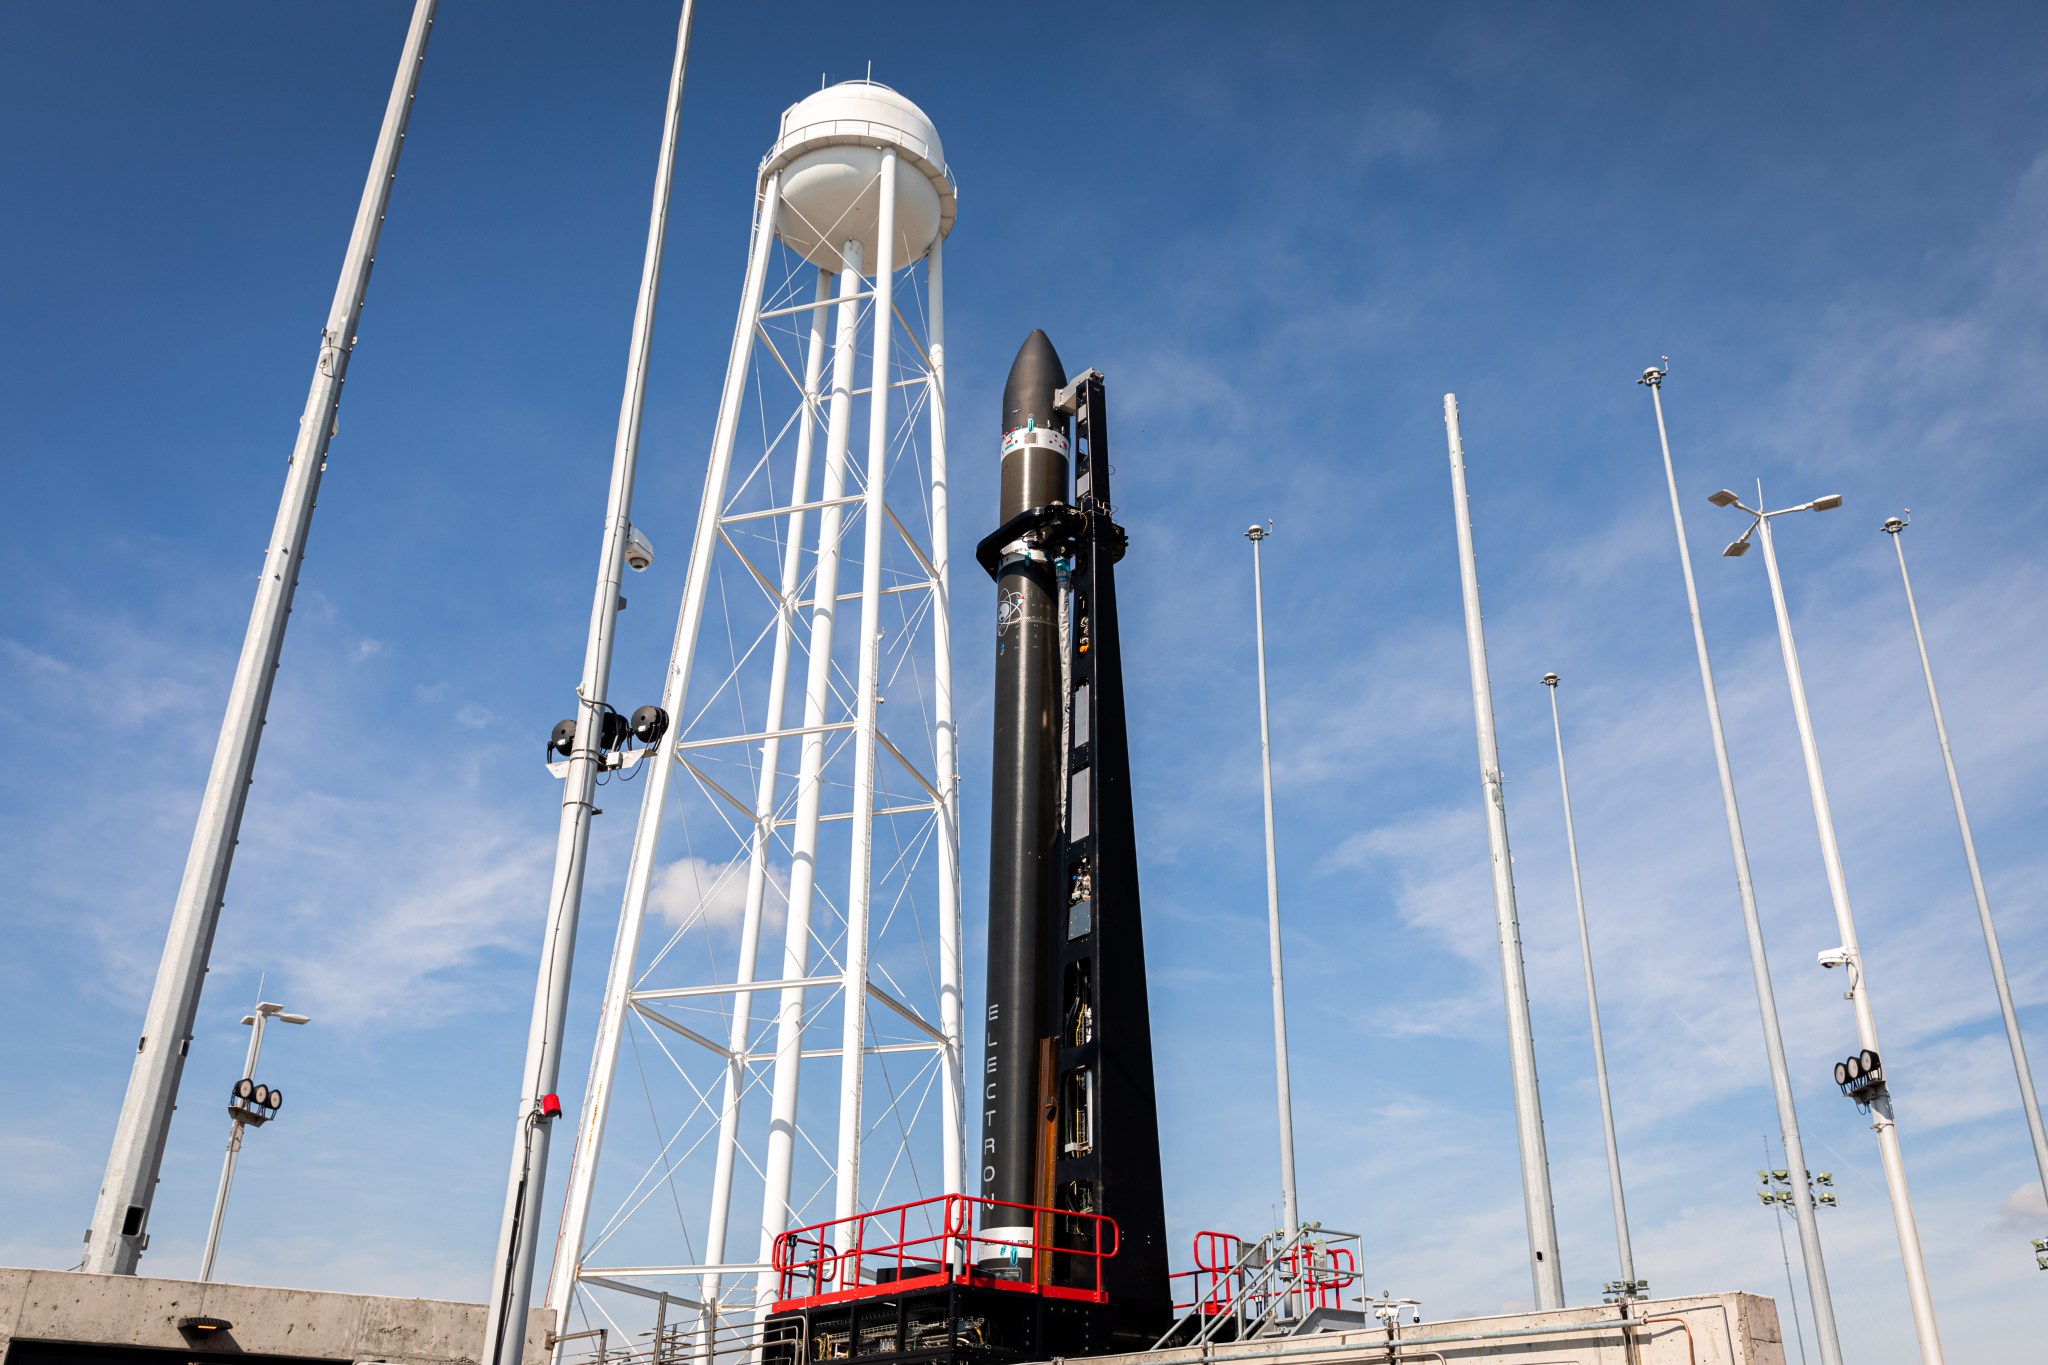 All black rocket on pad with the words "Electron" in white vertically down the rocket with blue skies and wispy clouds in the background.